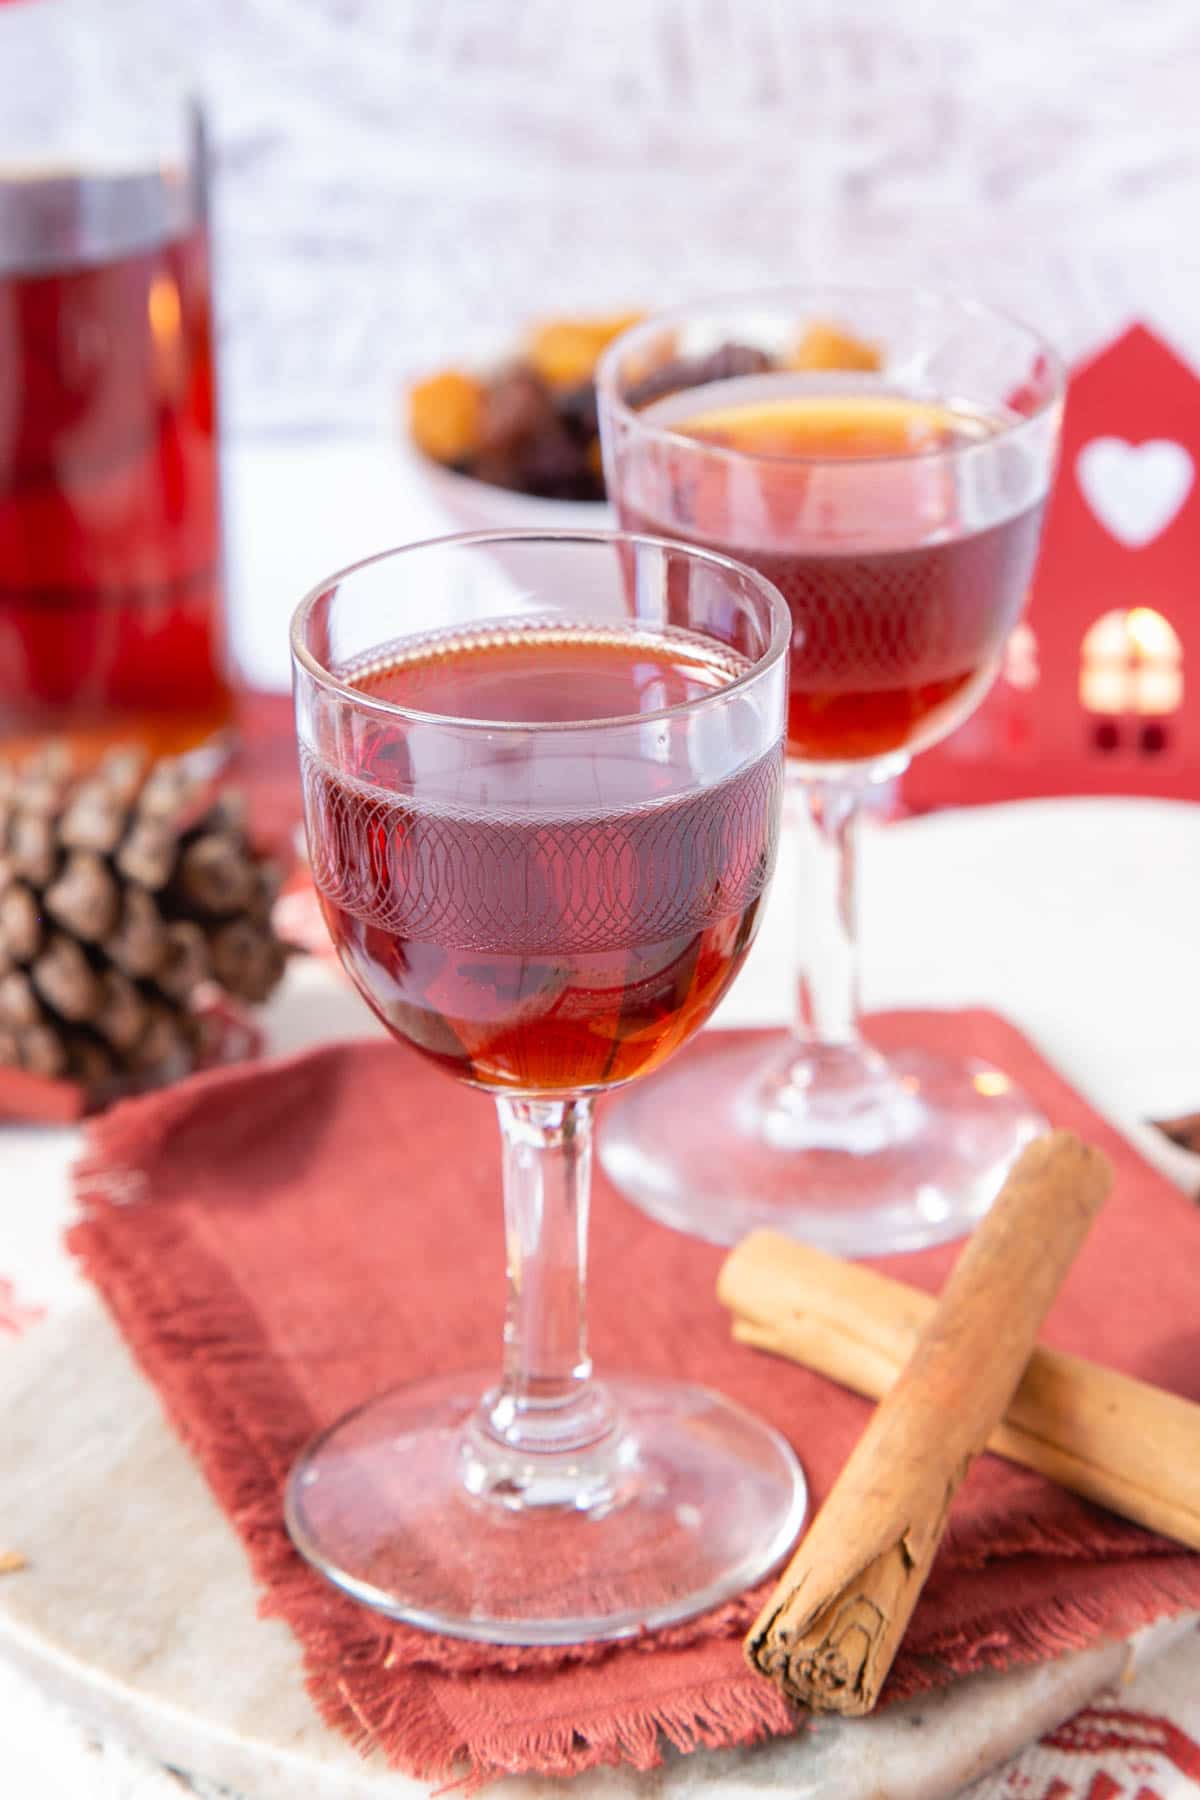 The warm, rich colour of this Christmas gin looks inviting against Scandinavian style Christmas decorations in red and white